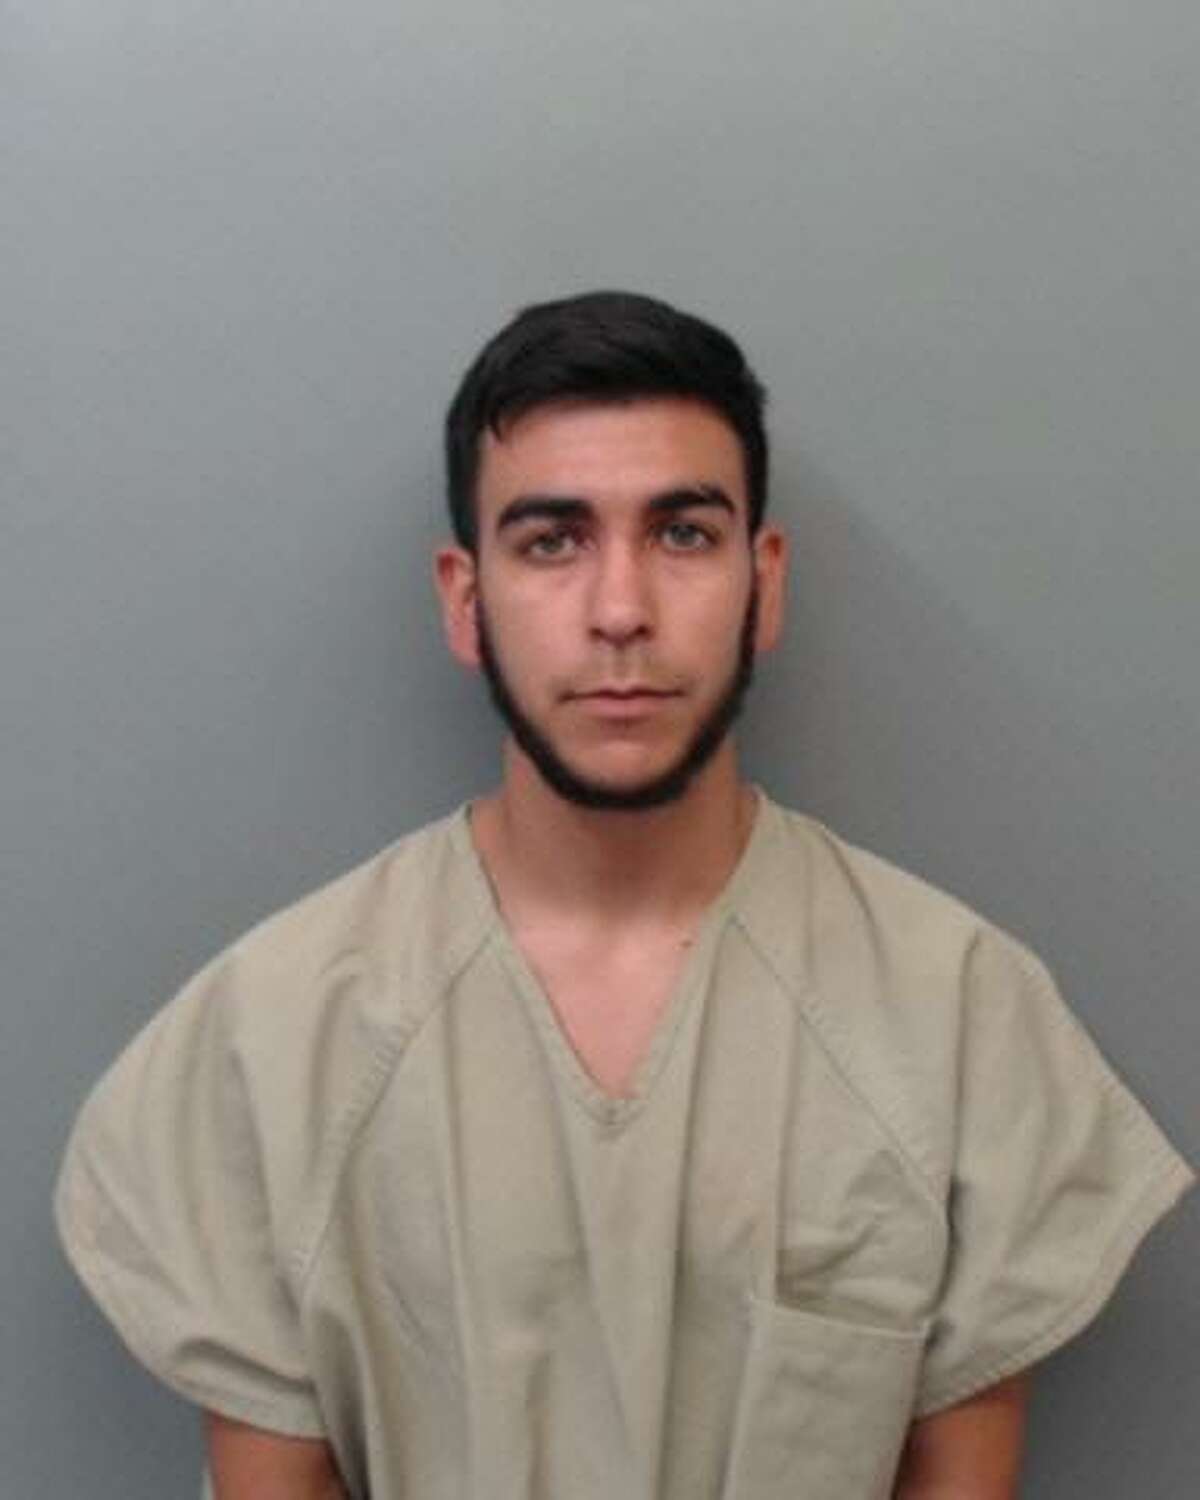 Juan Aaron Garza, 22, was charged with transporting and conspiring to transport immigrants who had crossed the border illegally.